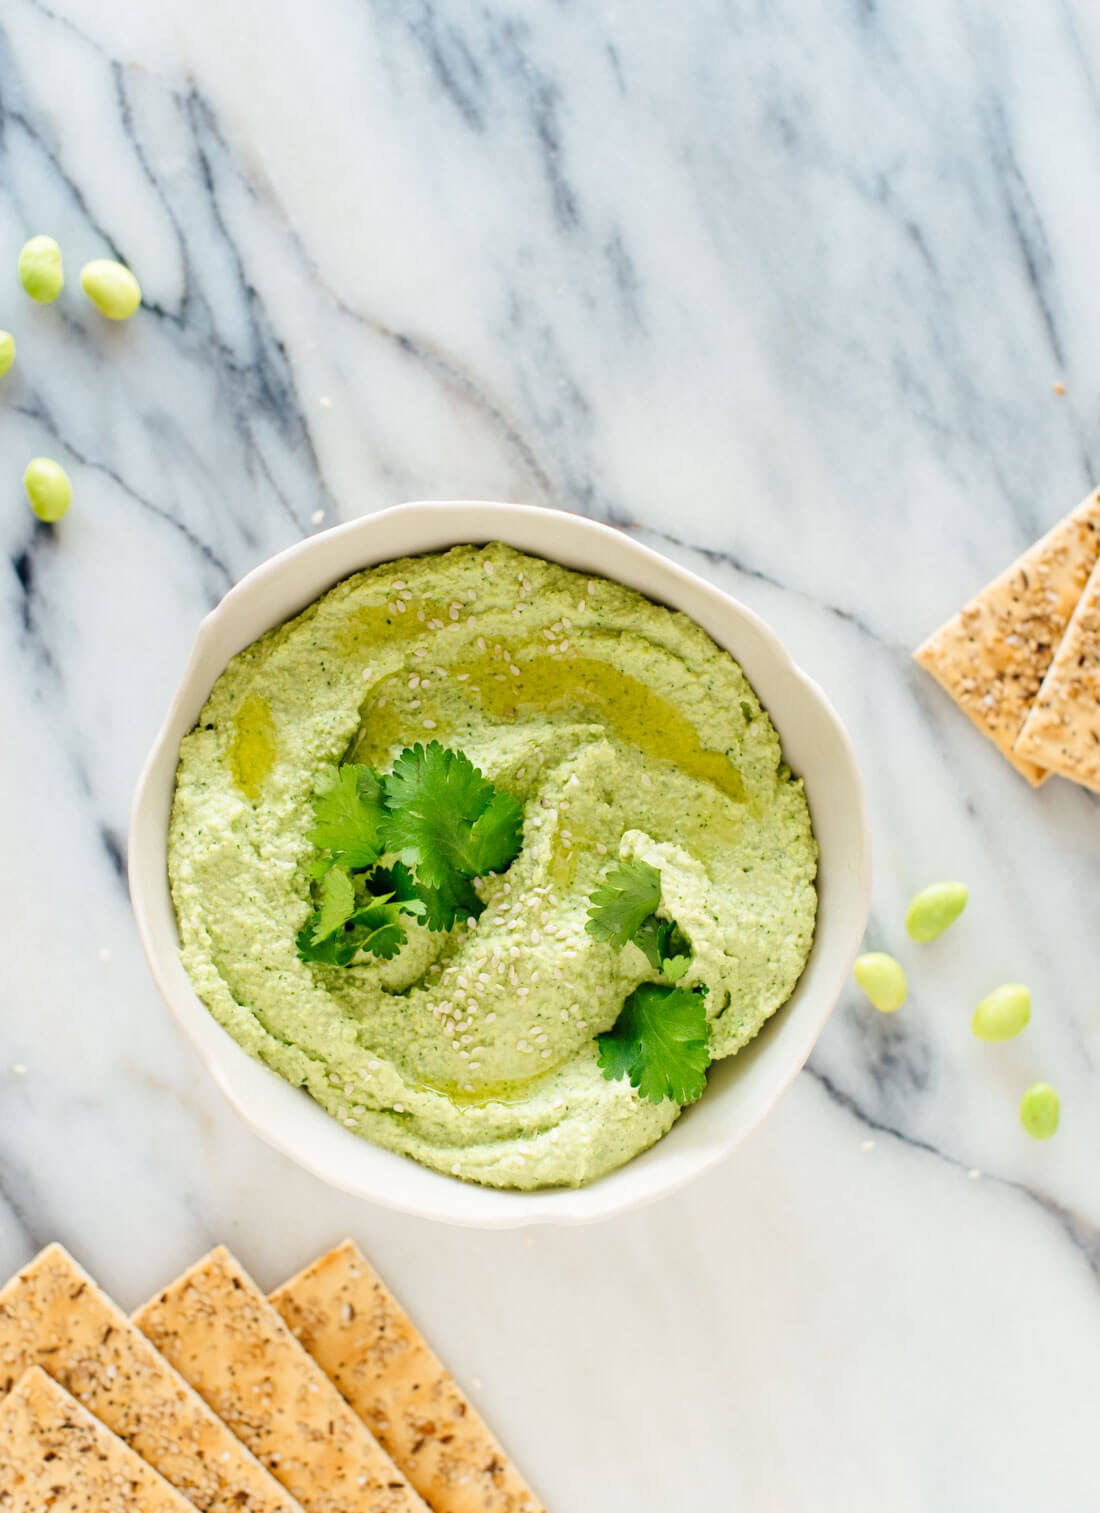 This delicious homemade edamame hummus tastes better than store-bought! This healthy snack happens to be vegan, gluten free and nut free. cookieandkate.com